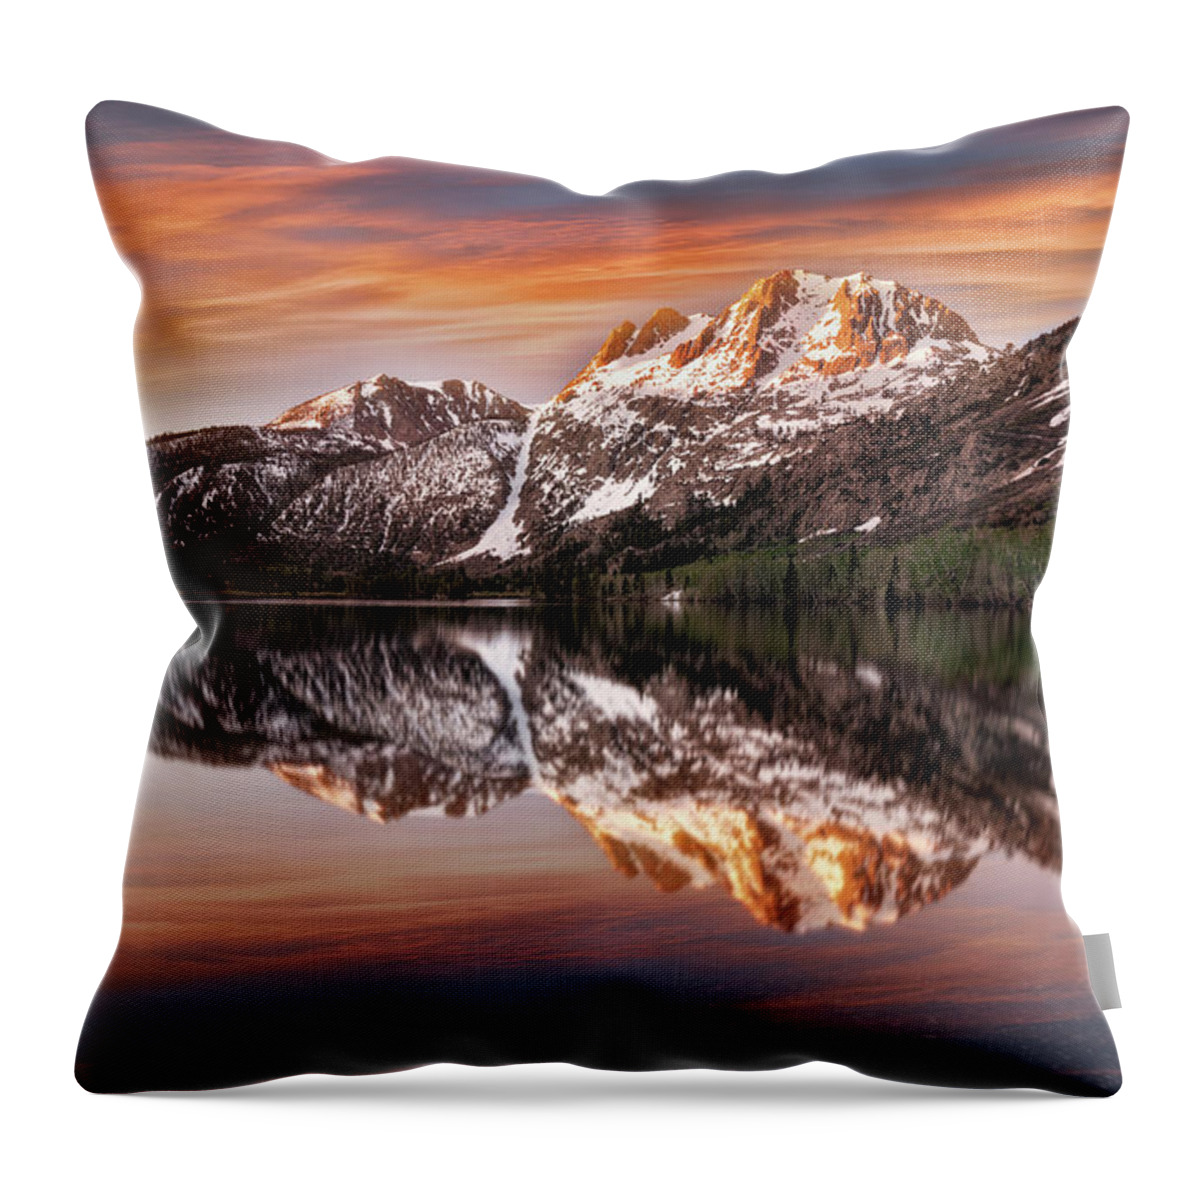 Sunrise Throw Pillow featuring the photograph Orange Relections by Nicki Frates